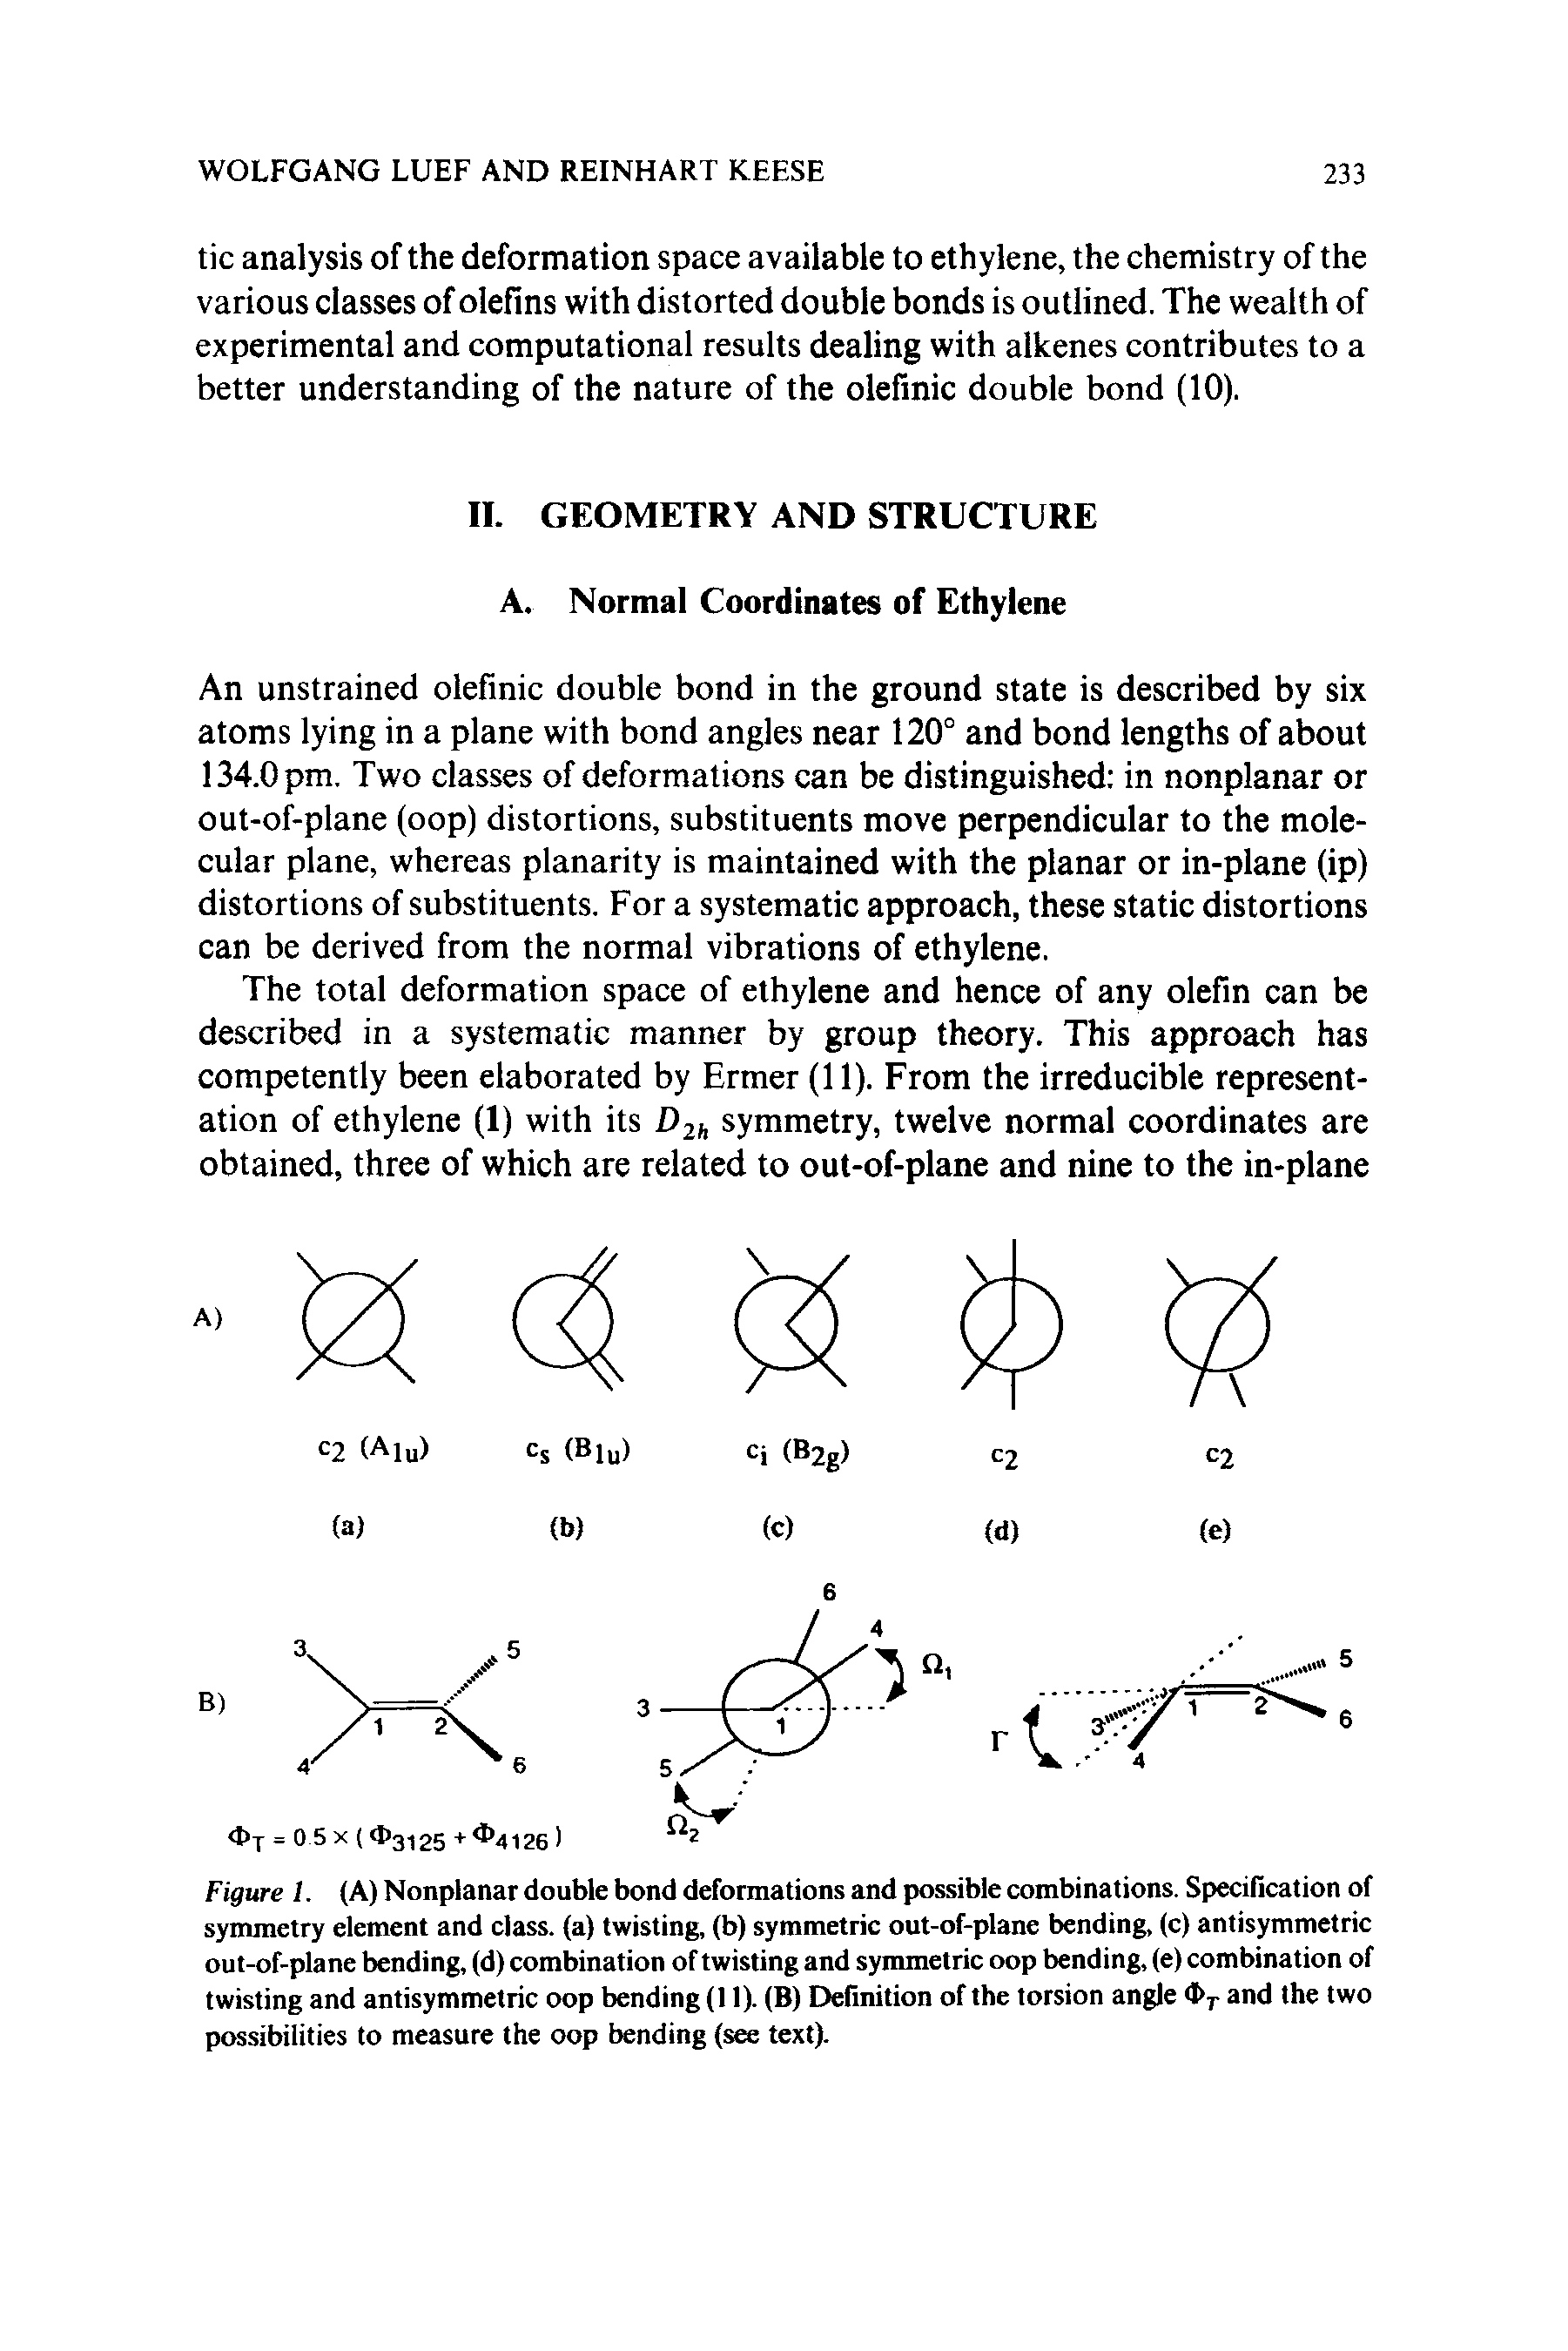 Figure 1. (A) Nonplanar double bond deformations and possible combinations. Specification of symmetry element and class, (a) twisting, (b) symmetric out-of-plane bending, (c) antisymmetric out-of-plane bending, (d) combination of twisting and symmetric oop bending, (e) combination of twisting and antisymmetric oop bending (11). (B) Definition of the torsion angle <t>r and the two possibilities to measure the oop bending (see text).